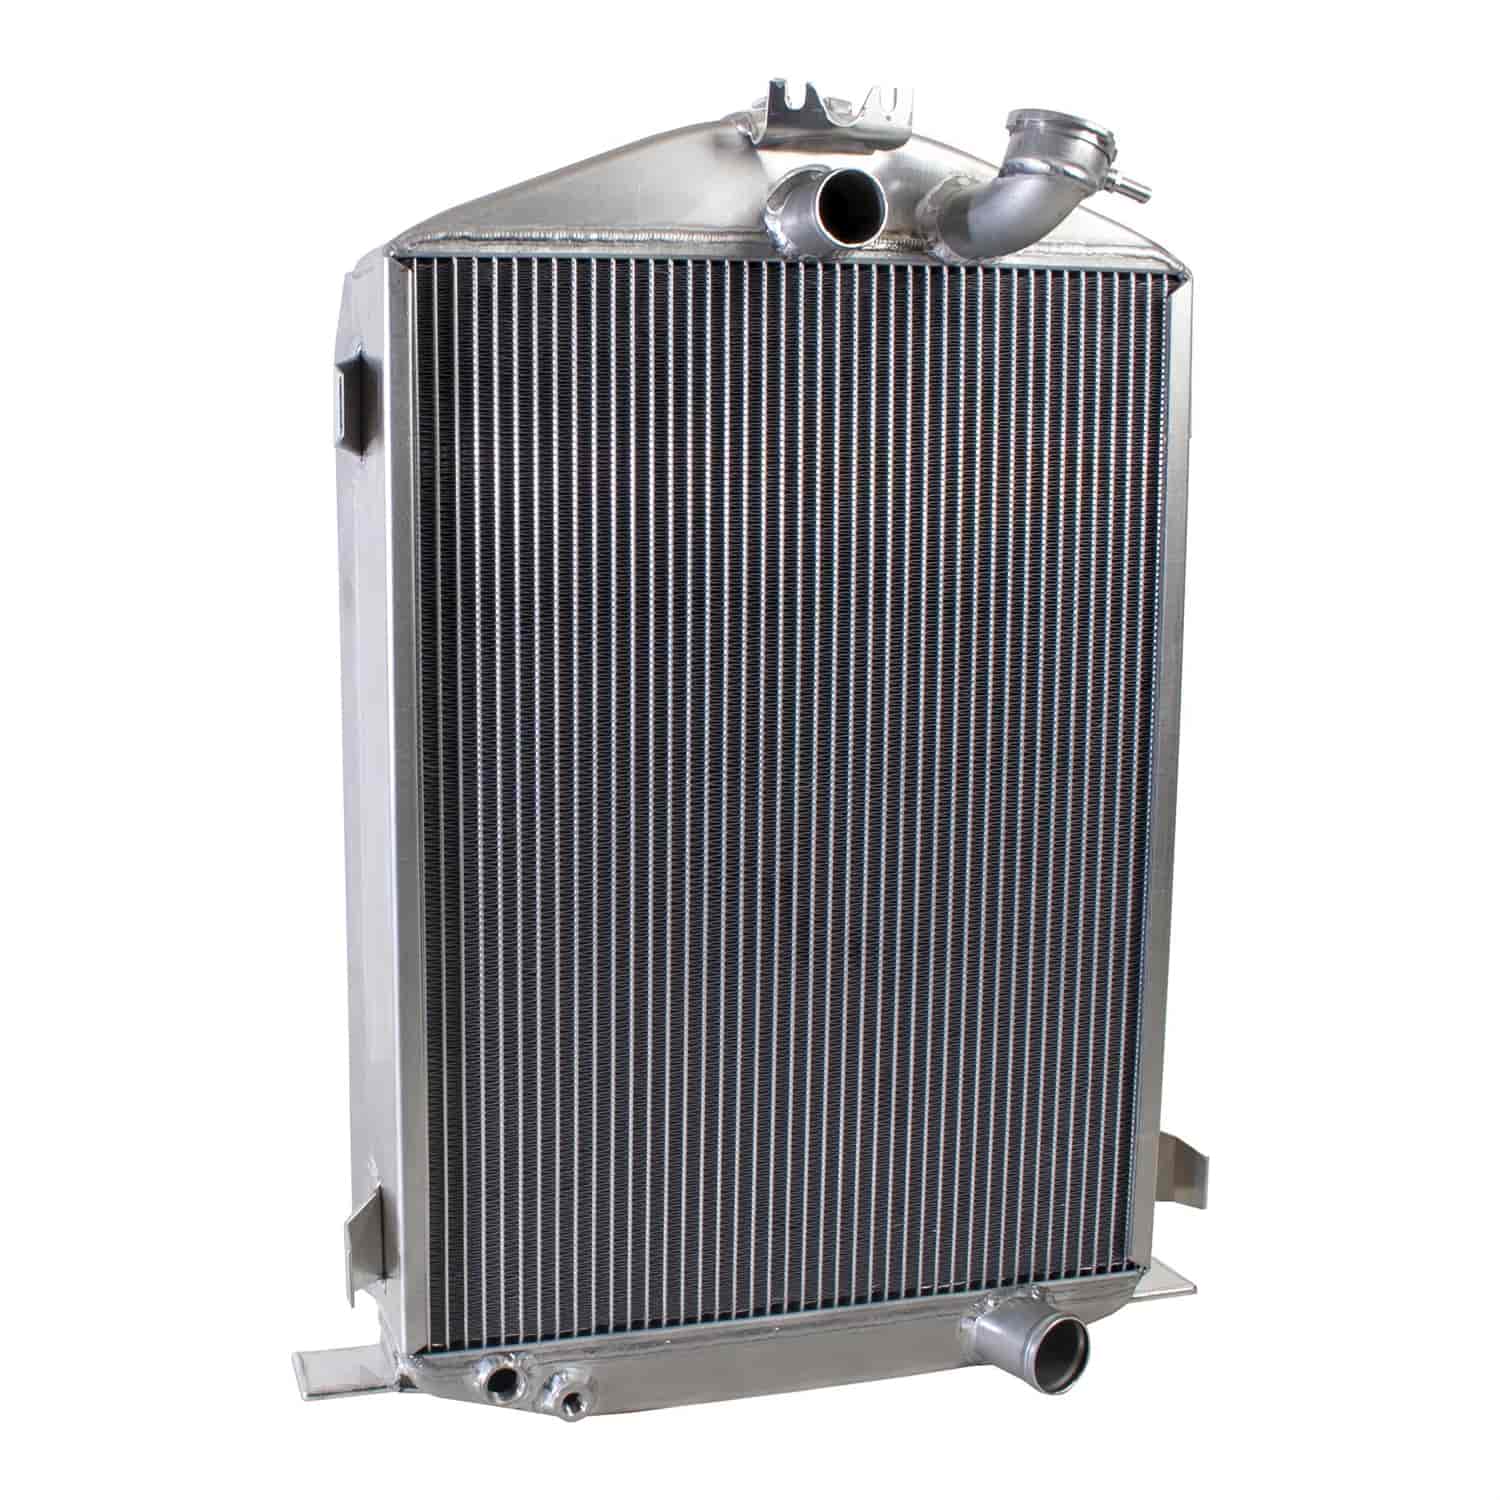 ExactFit Radiator for 1932 Model B with Early GM Engine; with Hood Rod Bracket